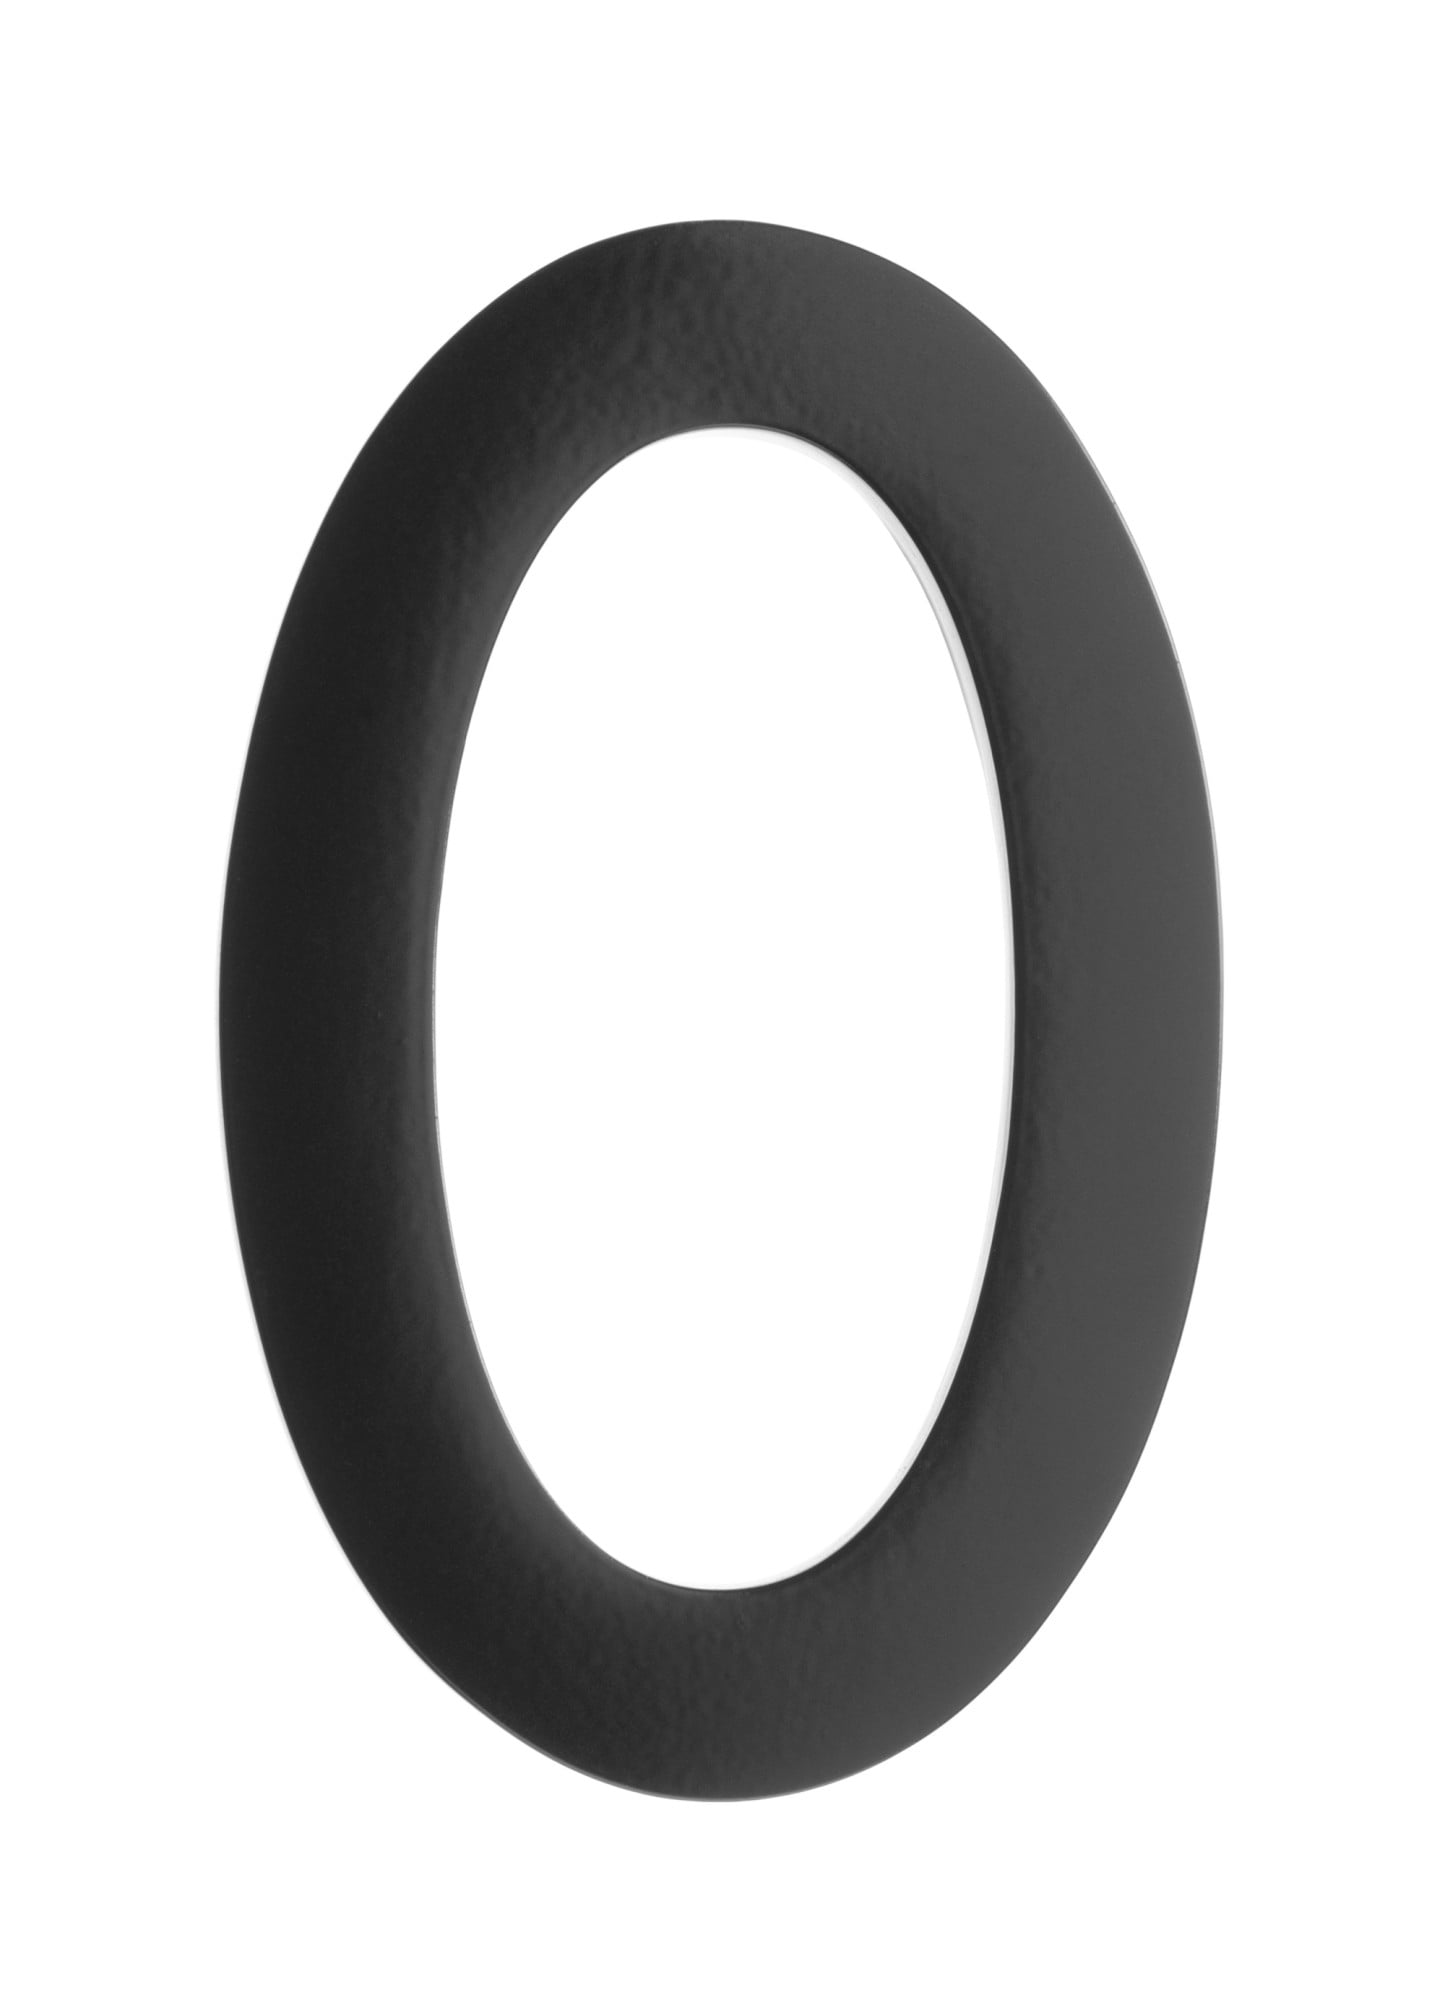 3582b-0 Floating House Number 0, Black - 4 In.